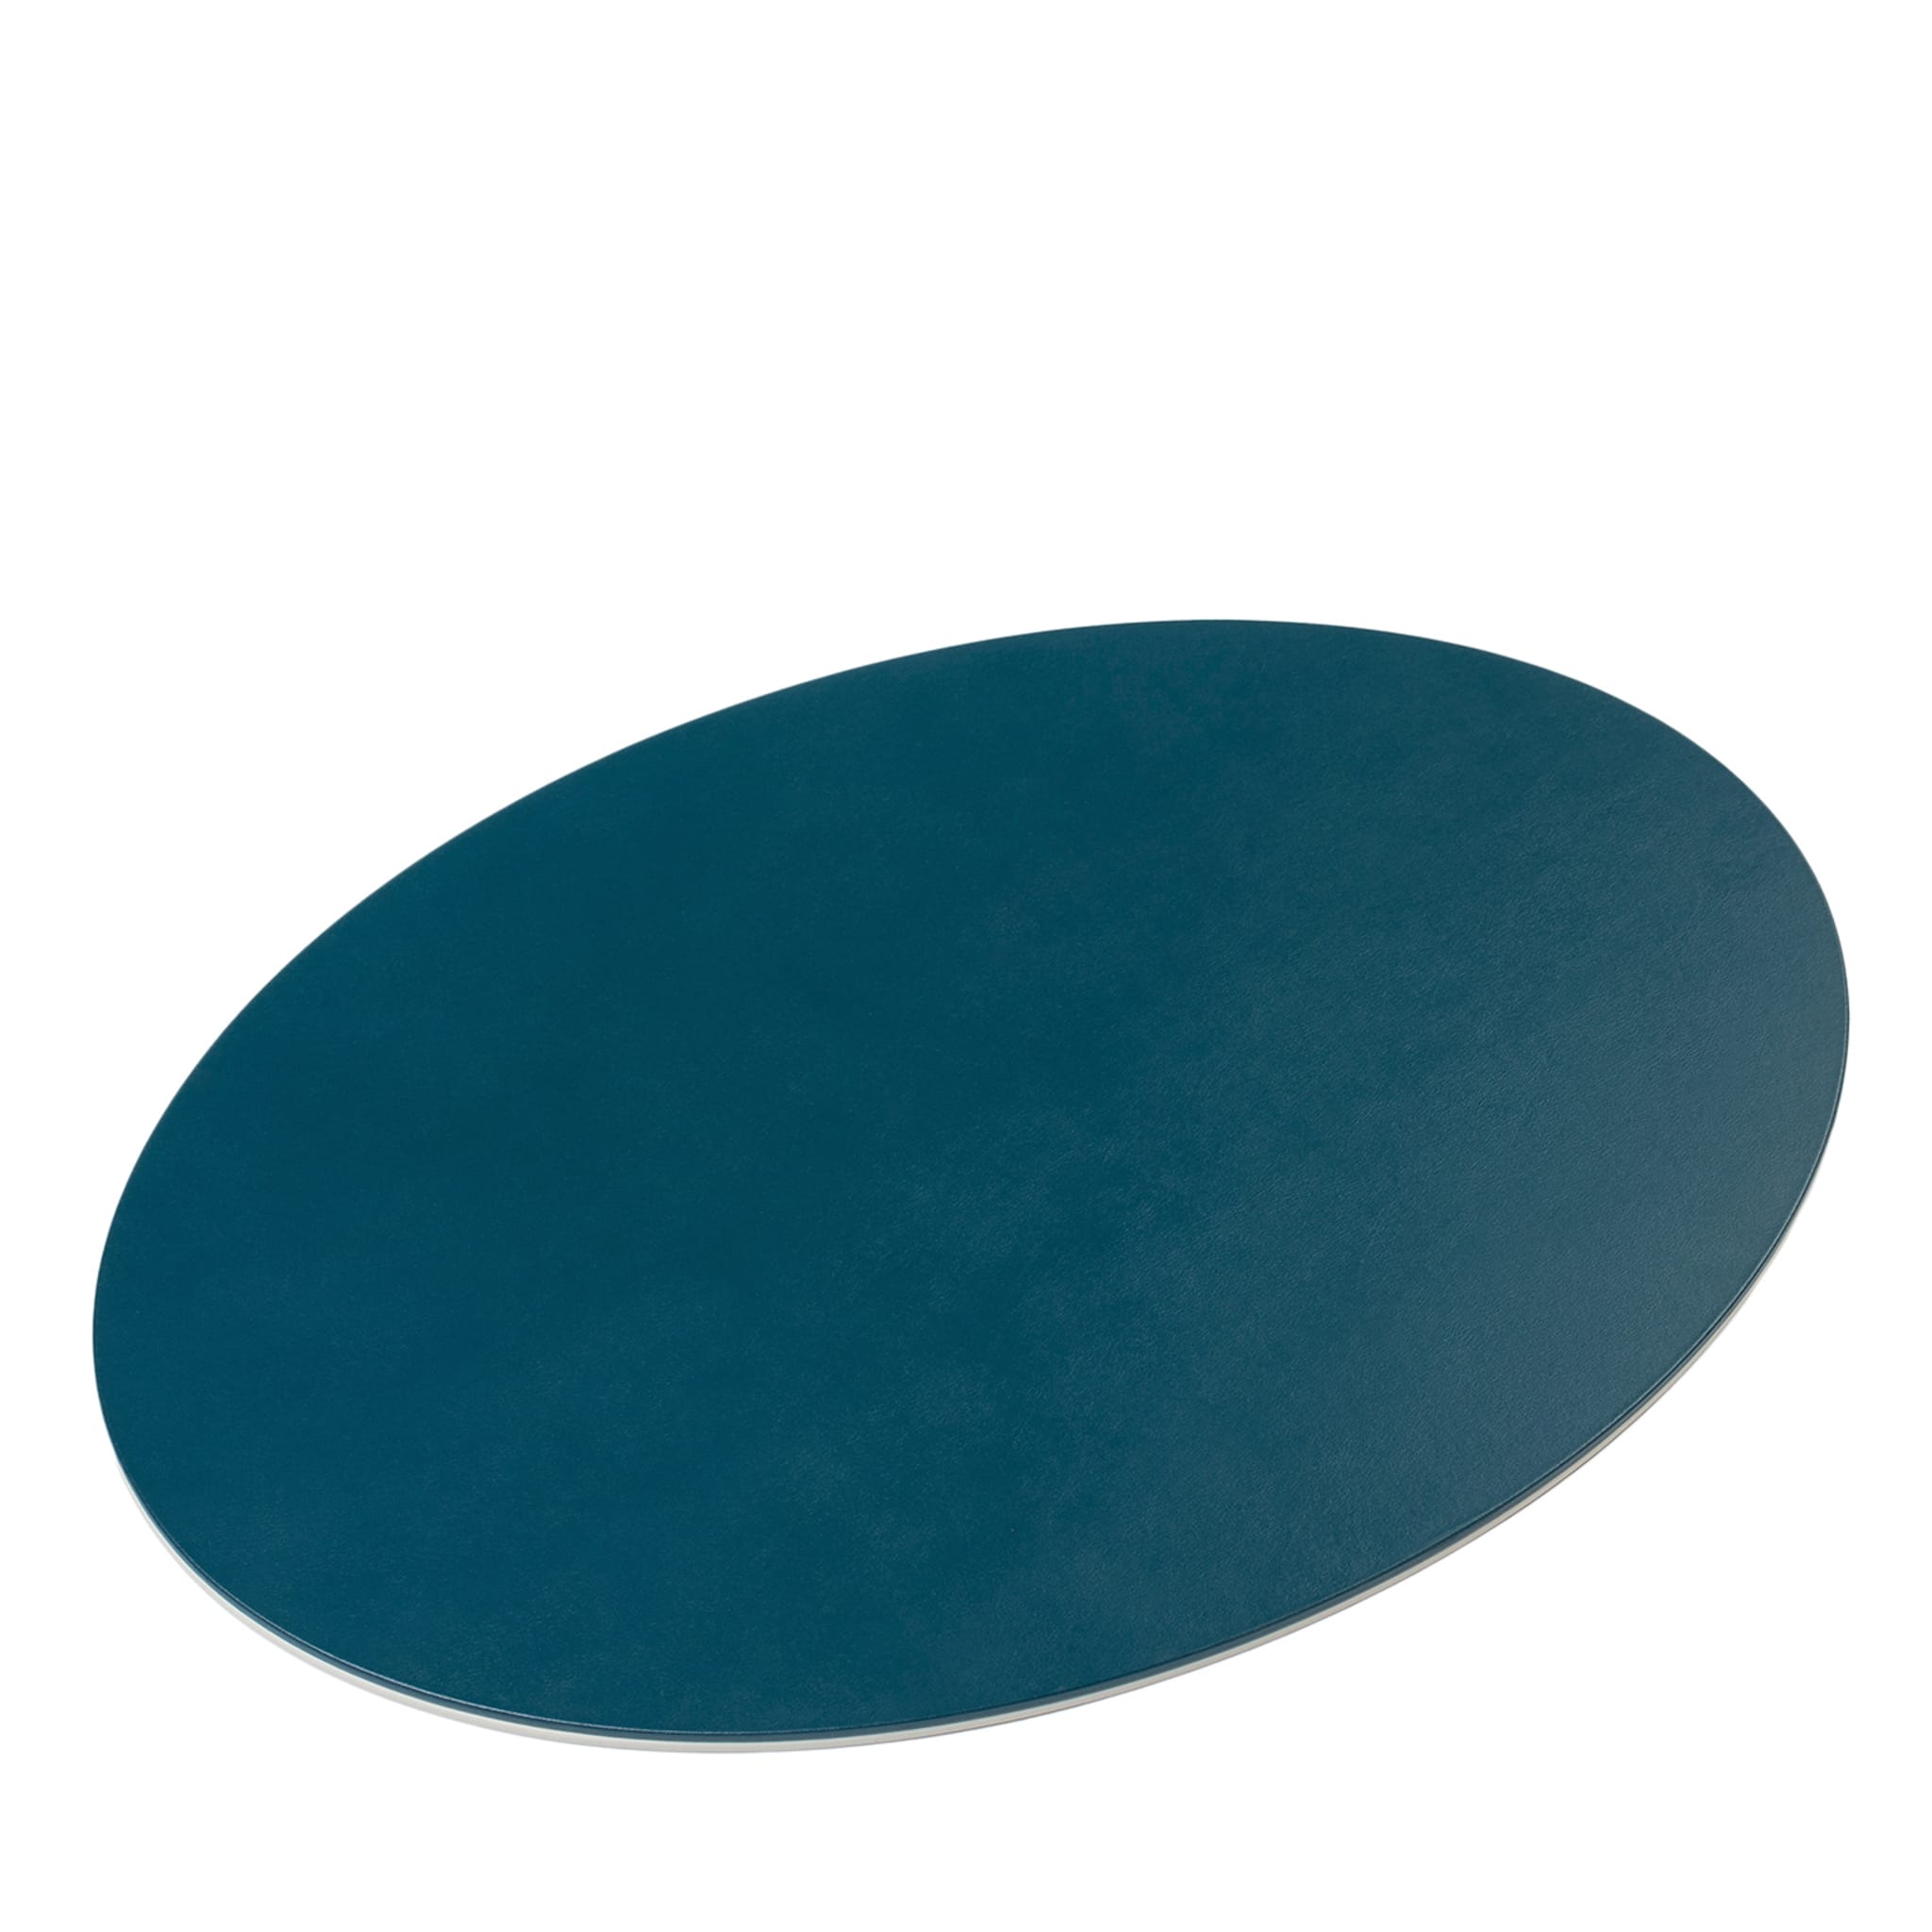 Mondrian Amalfi Blue and Luna White Oval Placemat - Main view